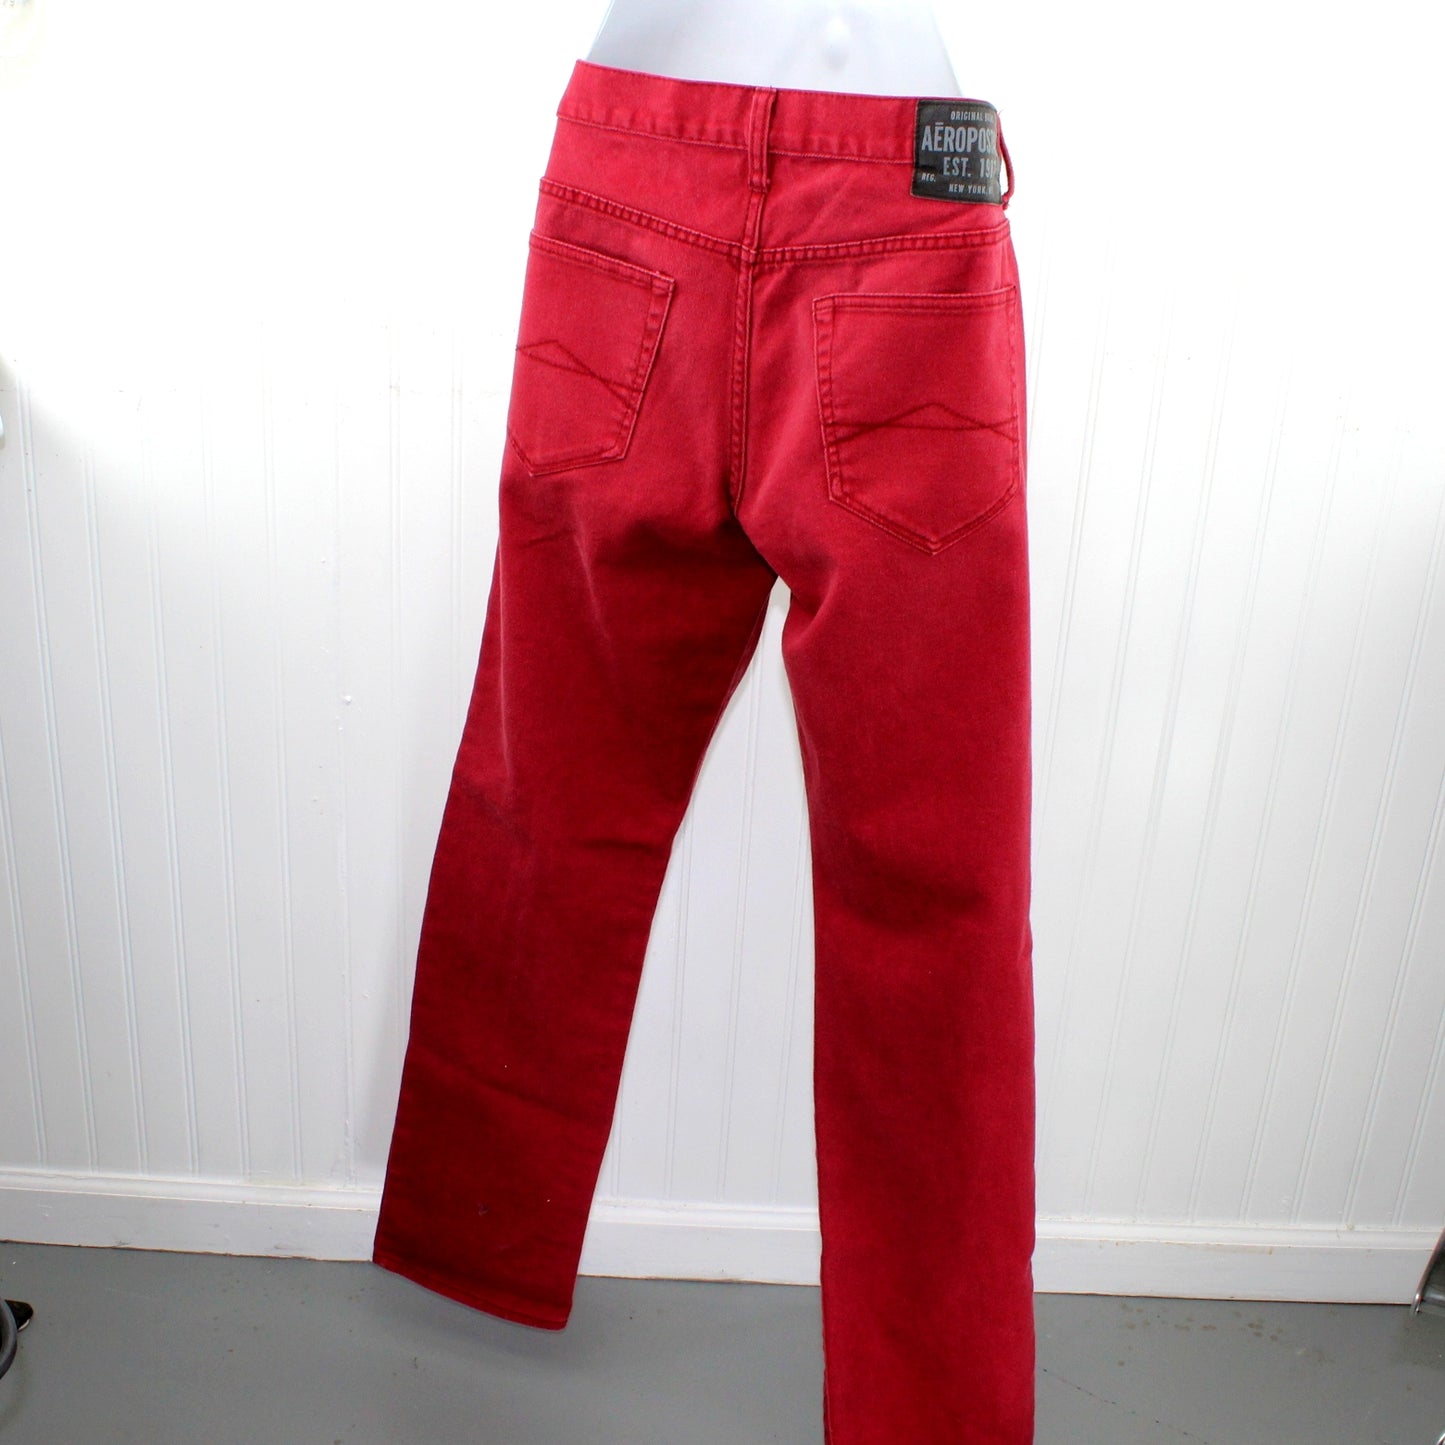 Aeropostale Bowery Vintage Slim Straight Jeans Red Cotton 98% Spandex 2% Size 32/34 vibrant color even no fade